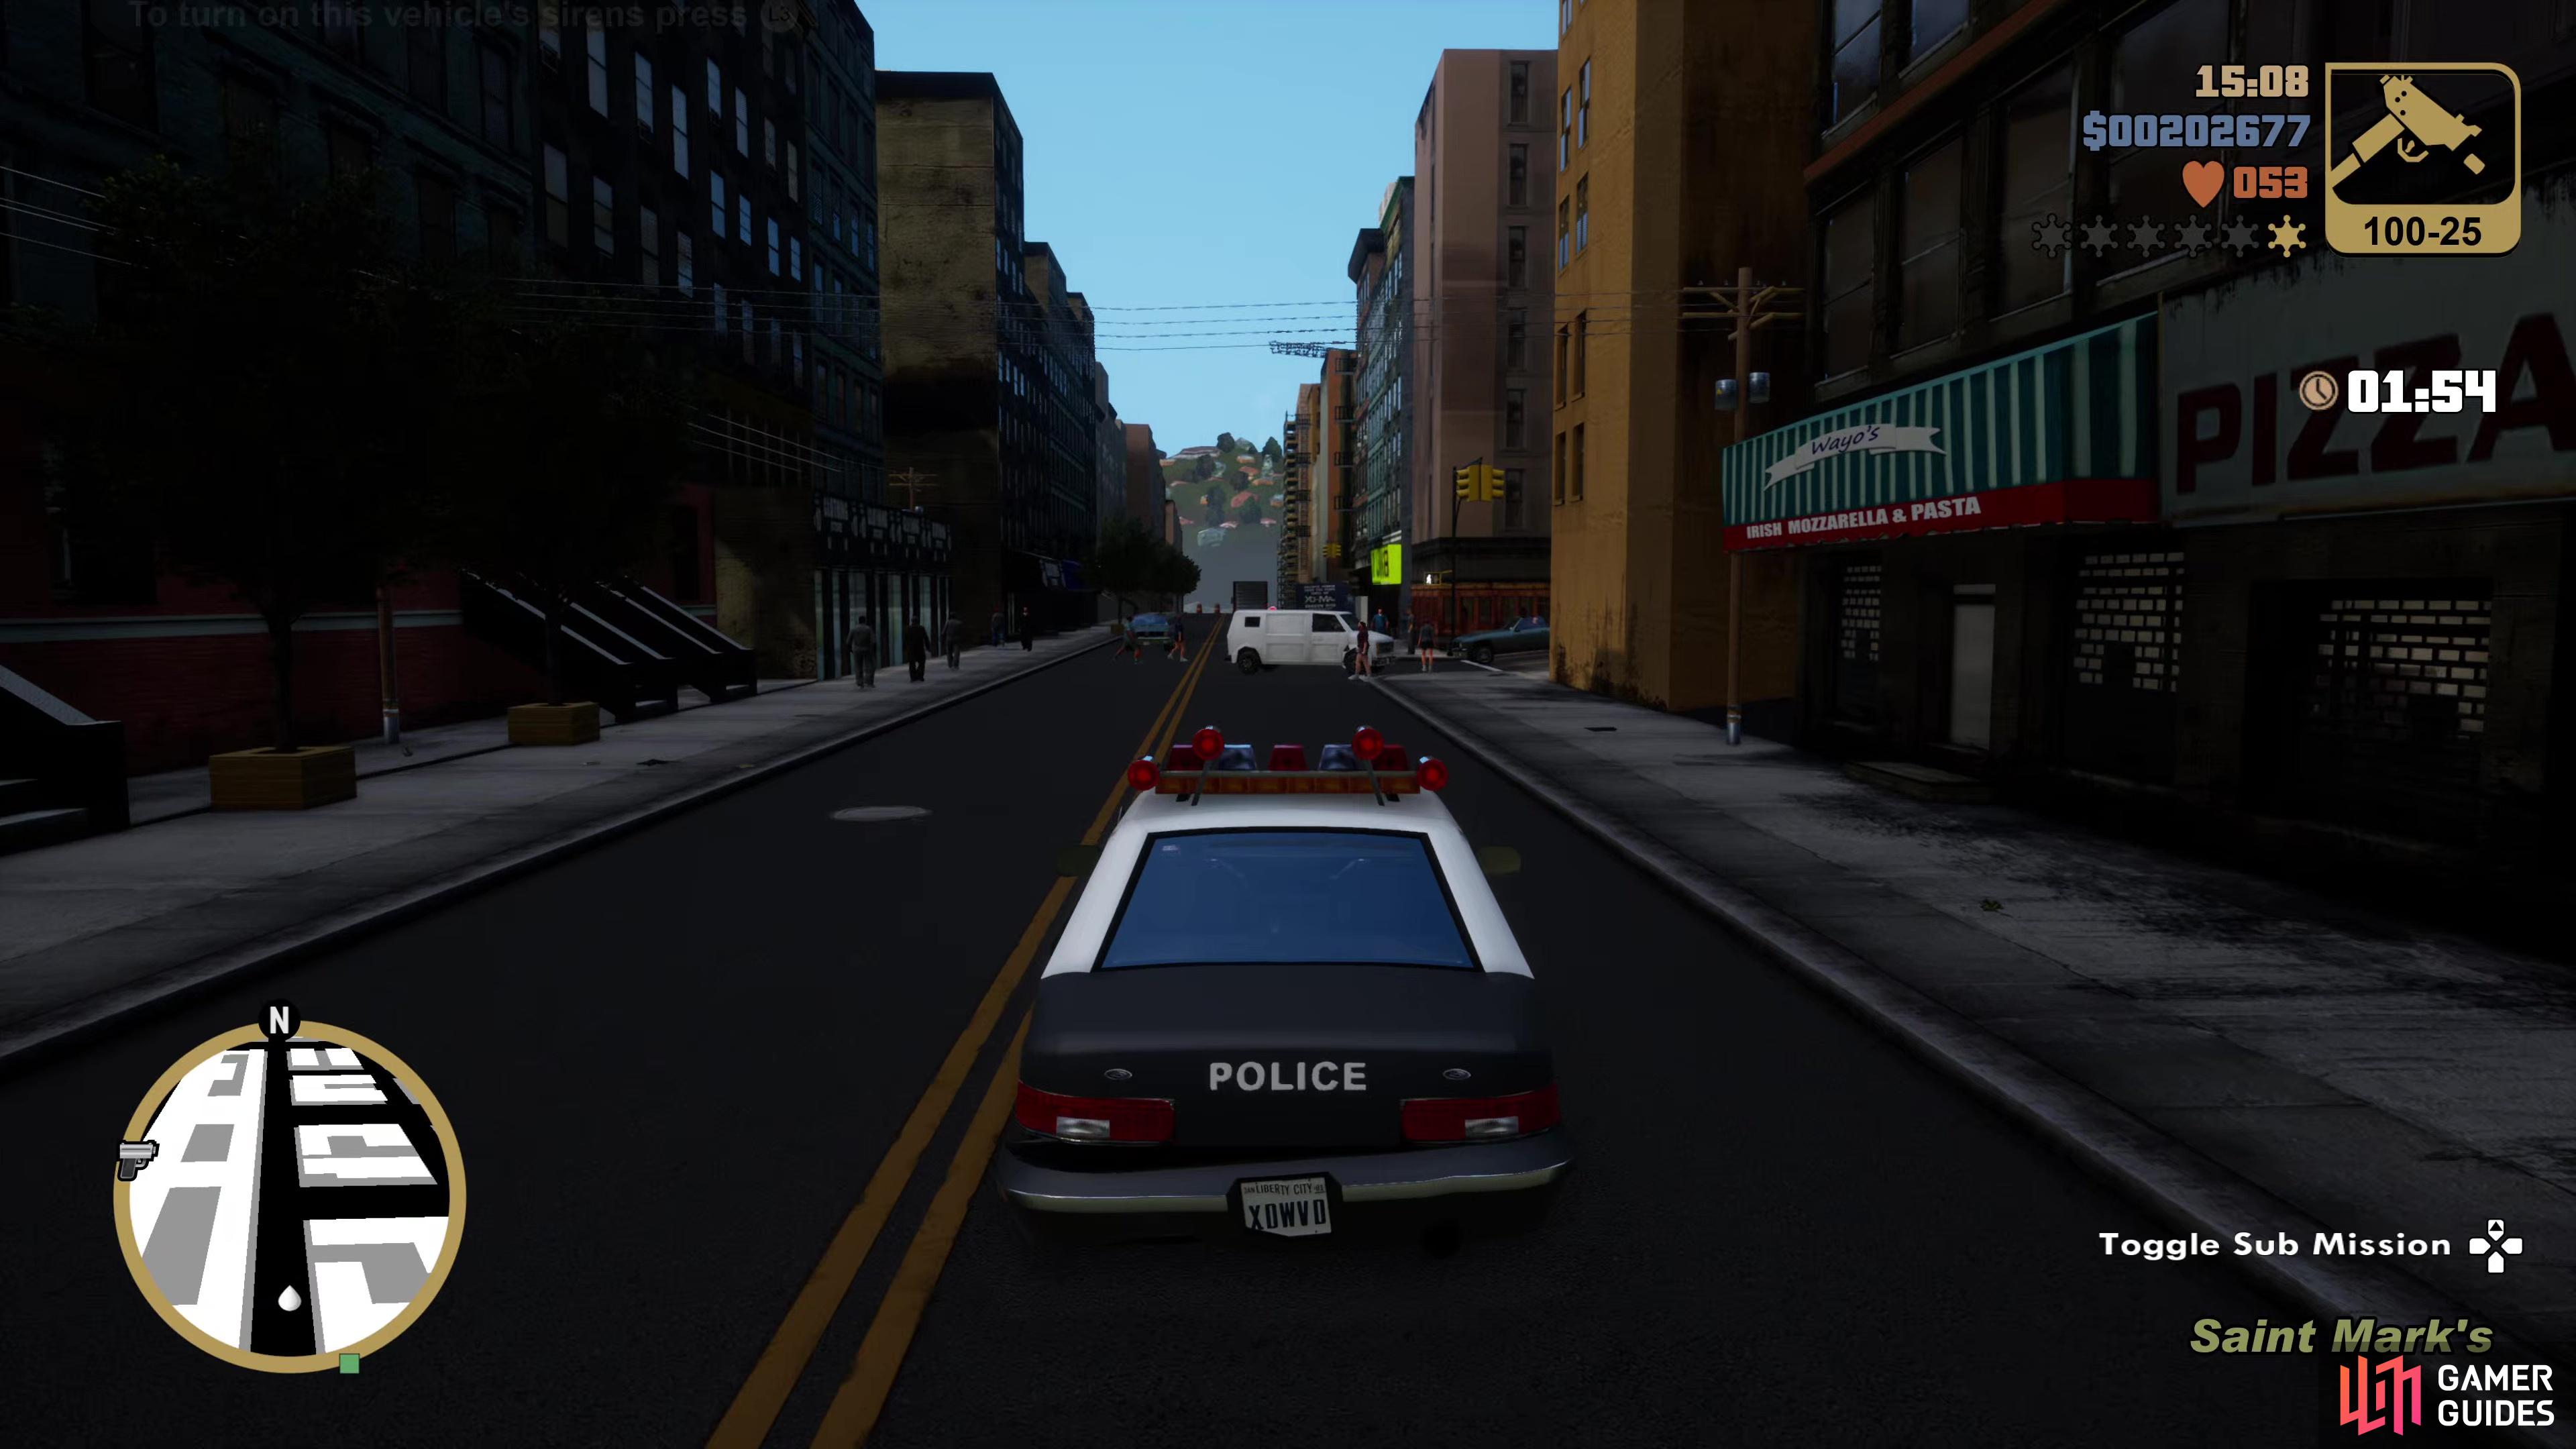 Steal a Police Car and press up on the D-PAD to begin a Vigilante Mission.